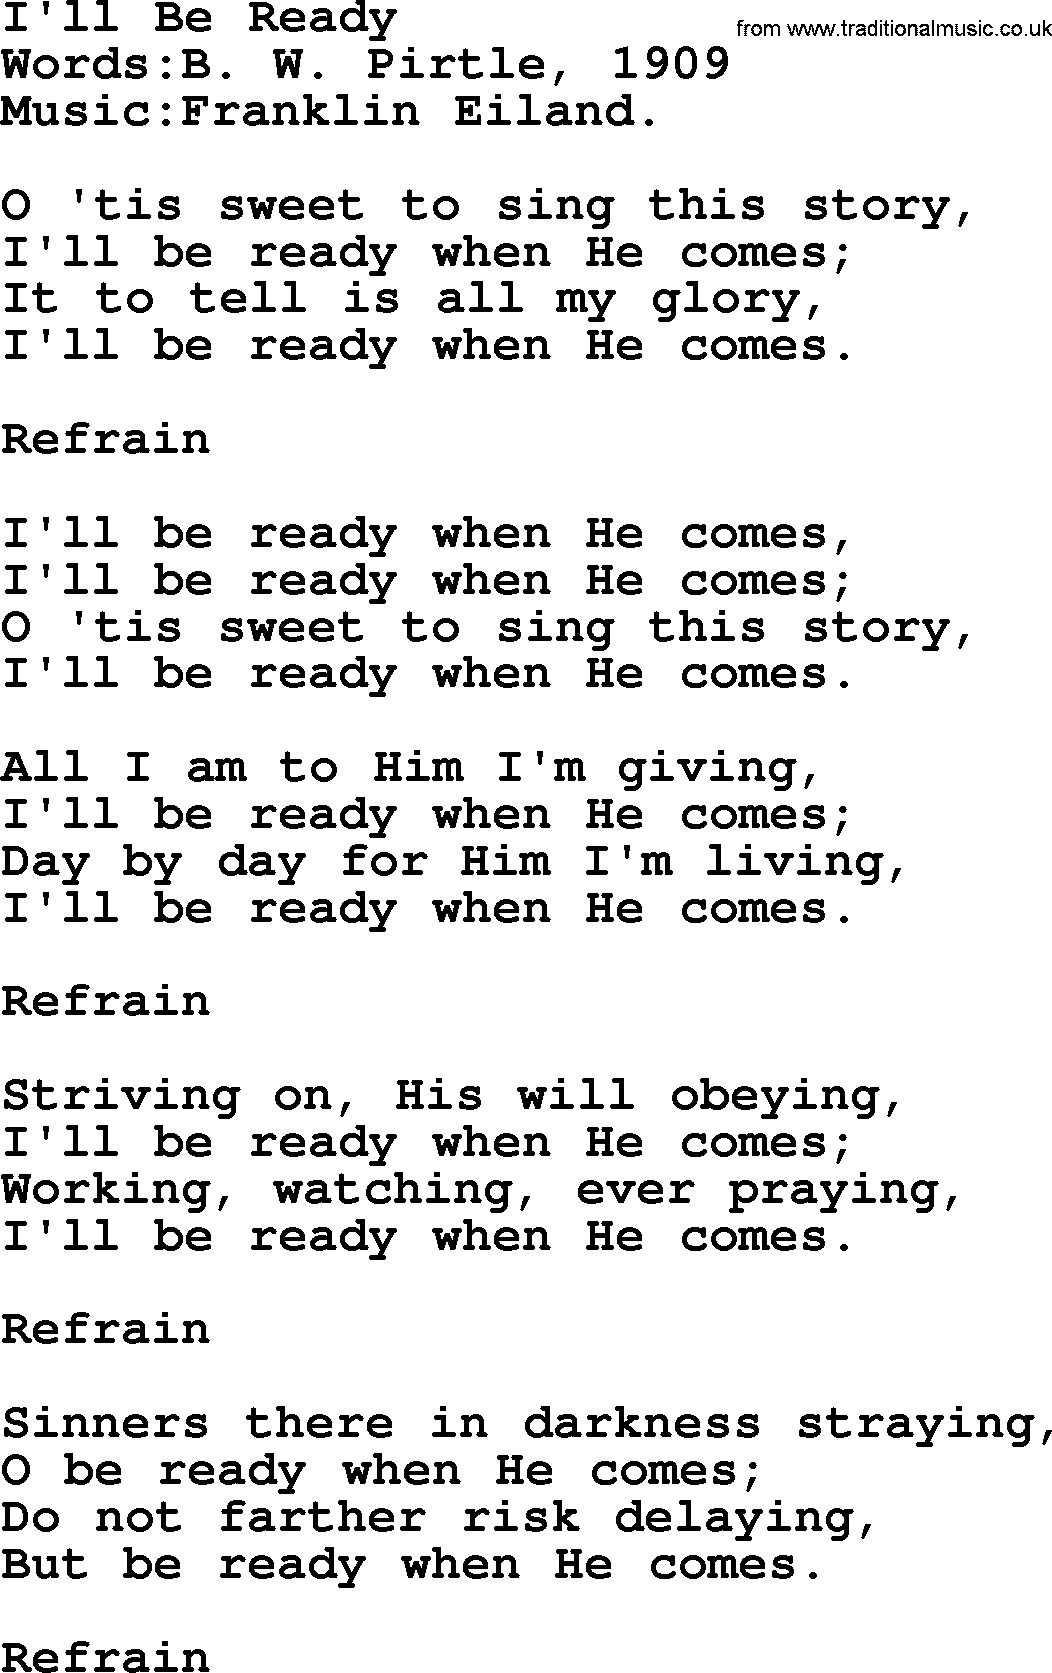 Christian hymns and songs about Jesus' Return(The Second Coming): I'll Be Ready, lyrics with PDF